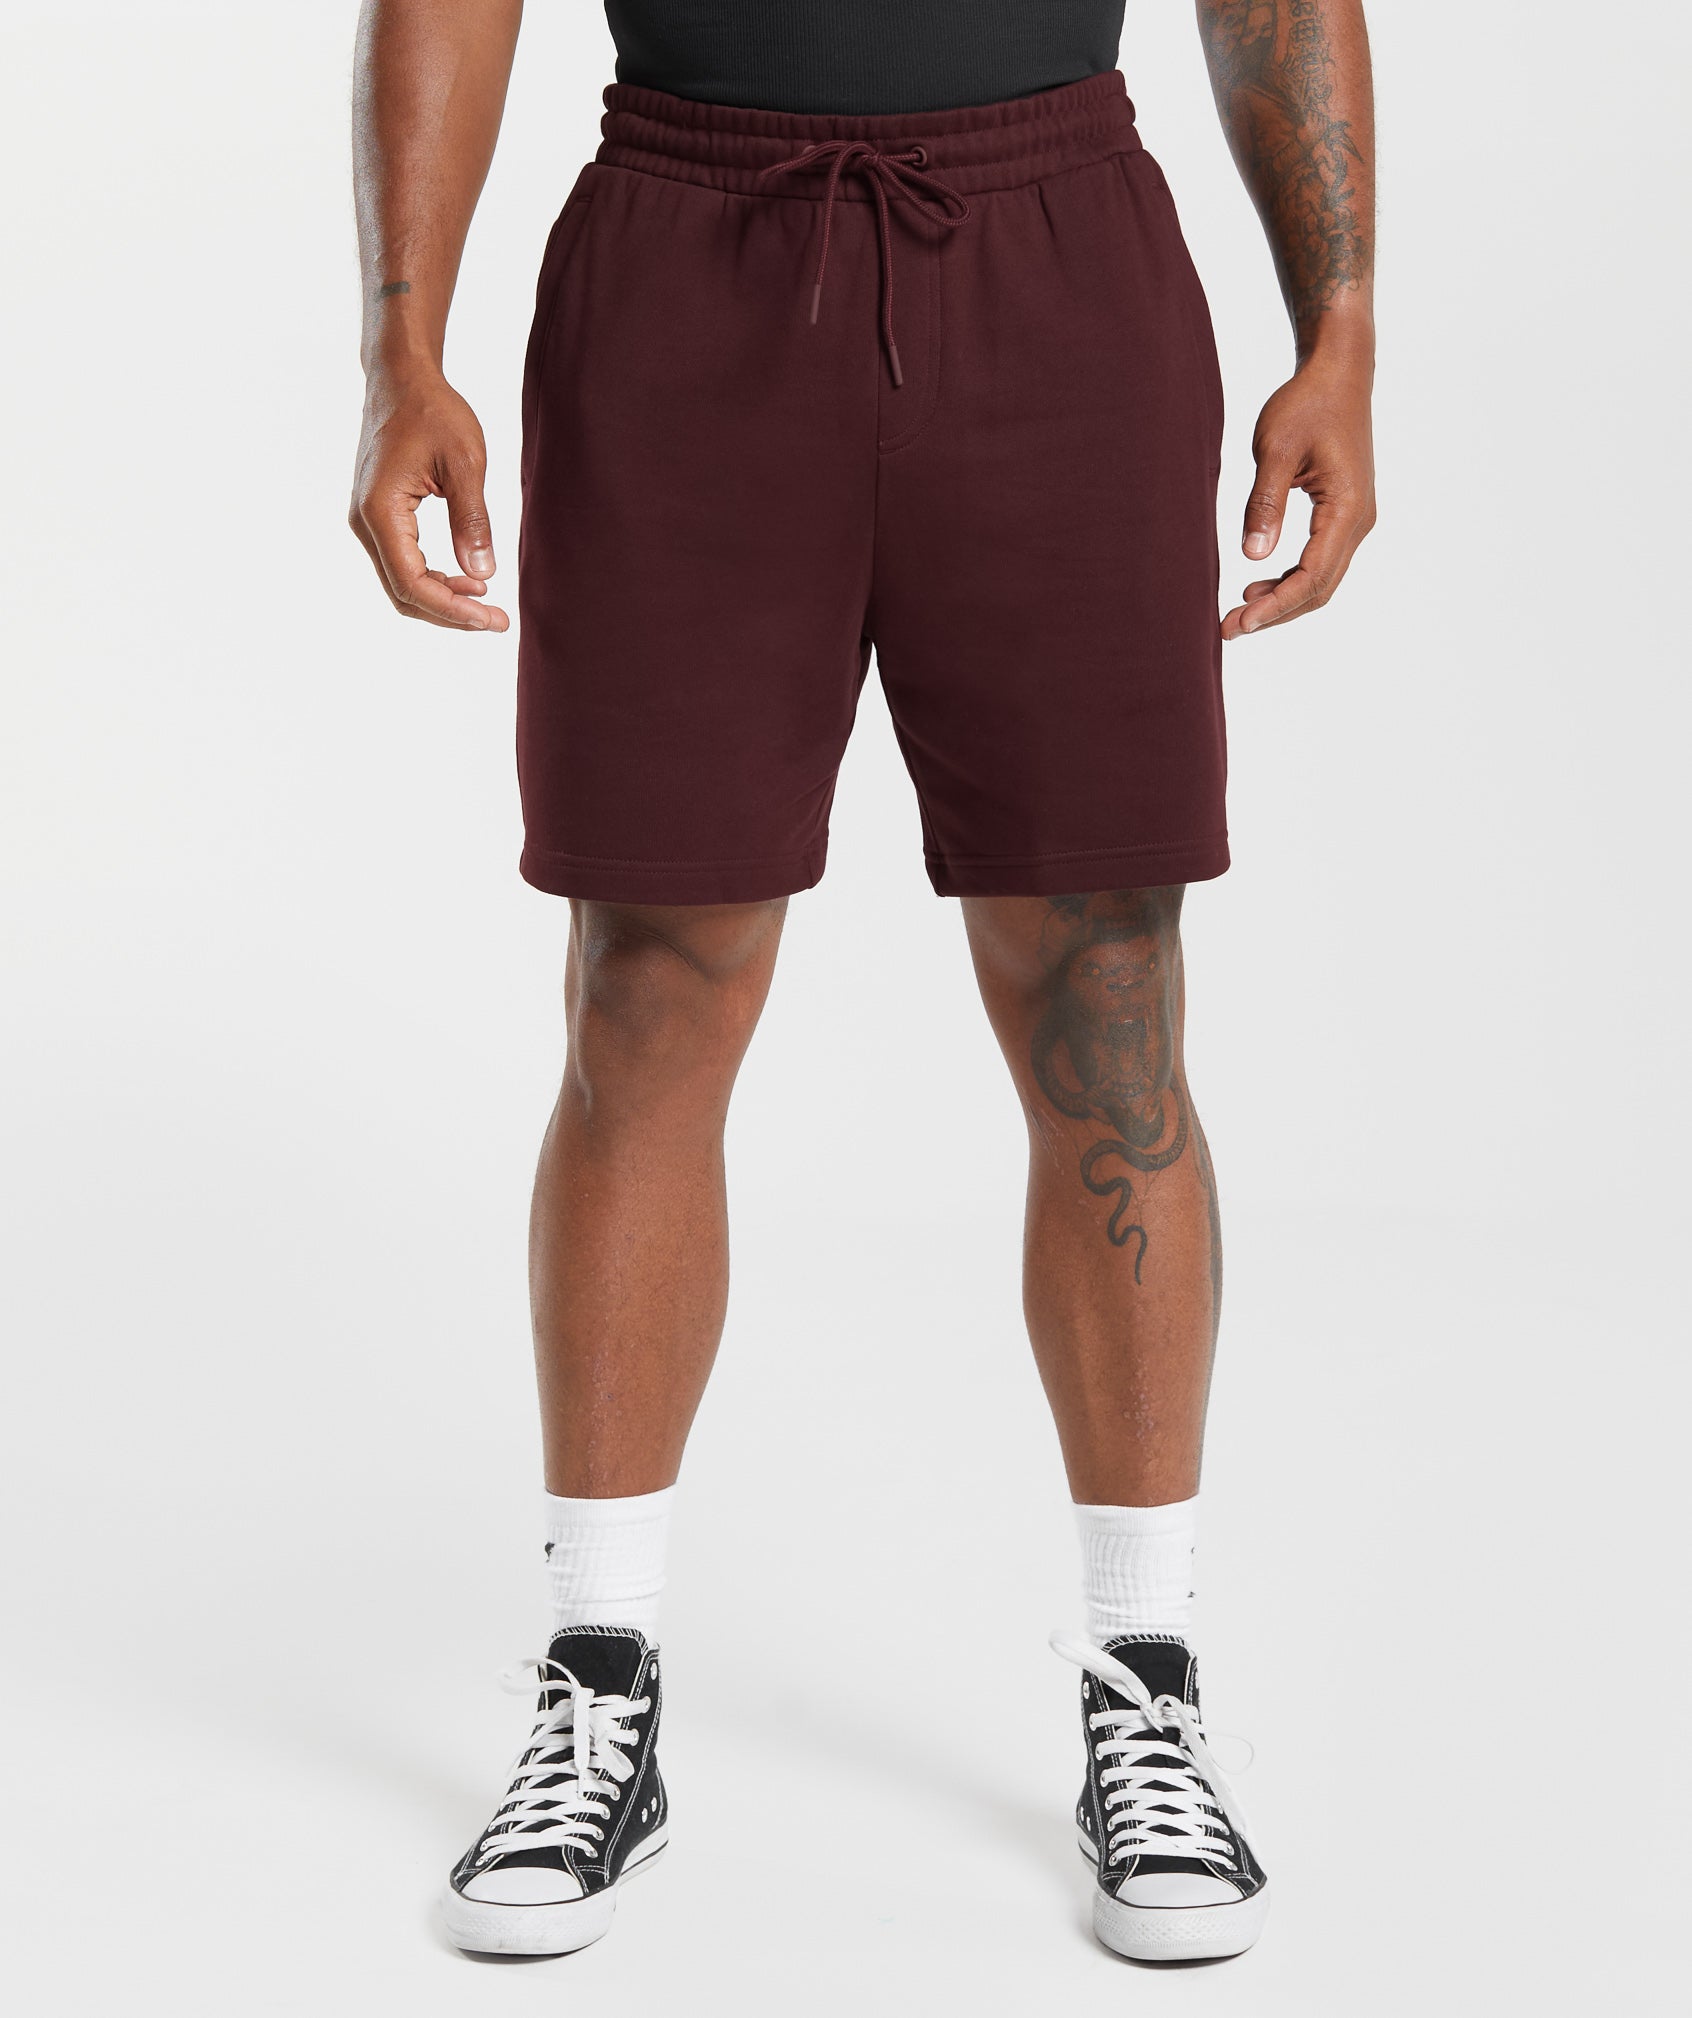 Rest Day Essentials 7" Shorts in Rich Maroon is out of stock